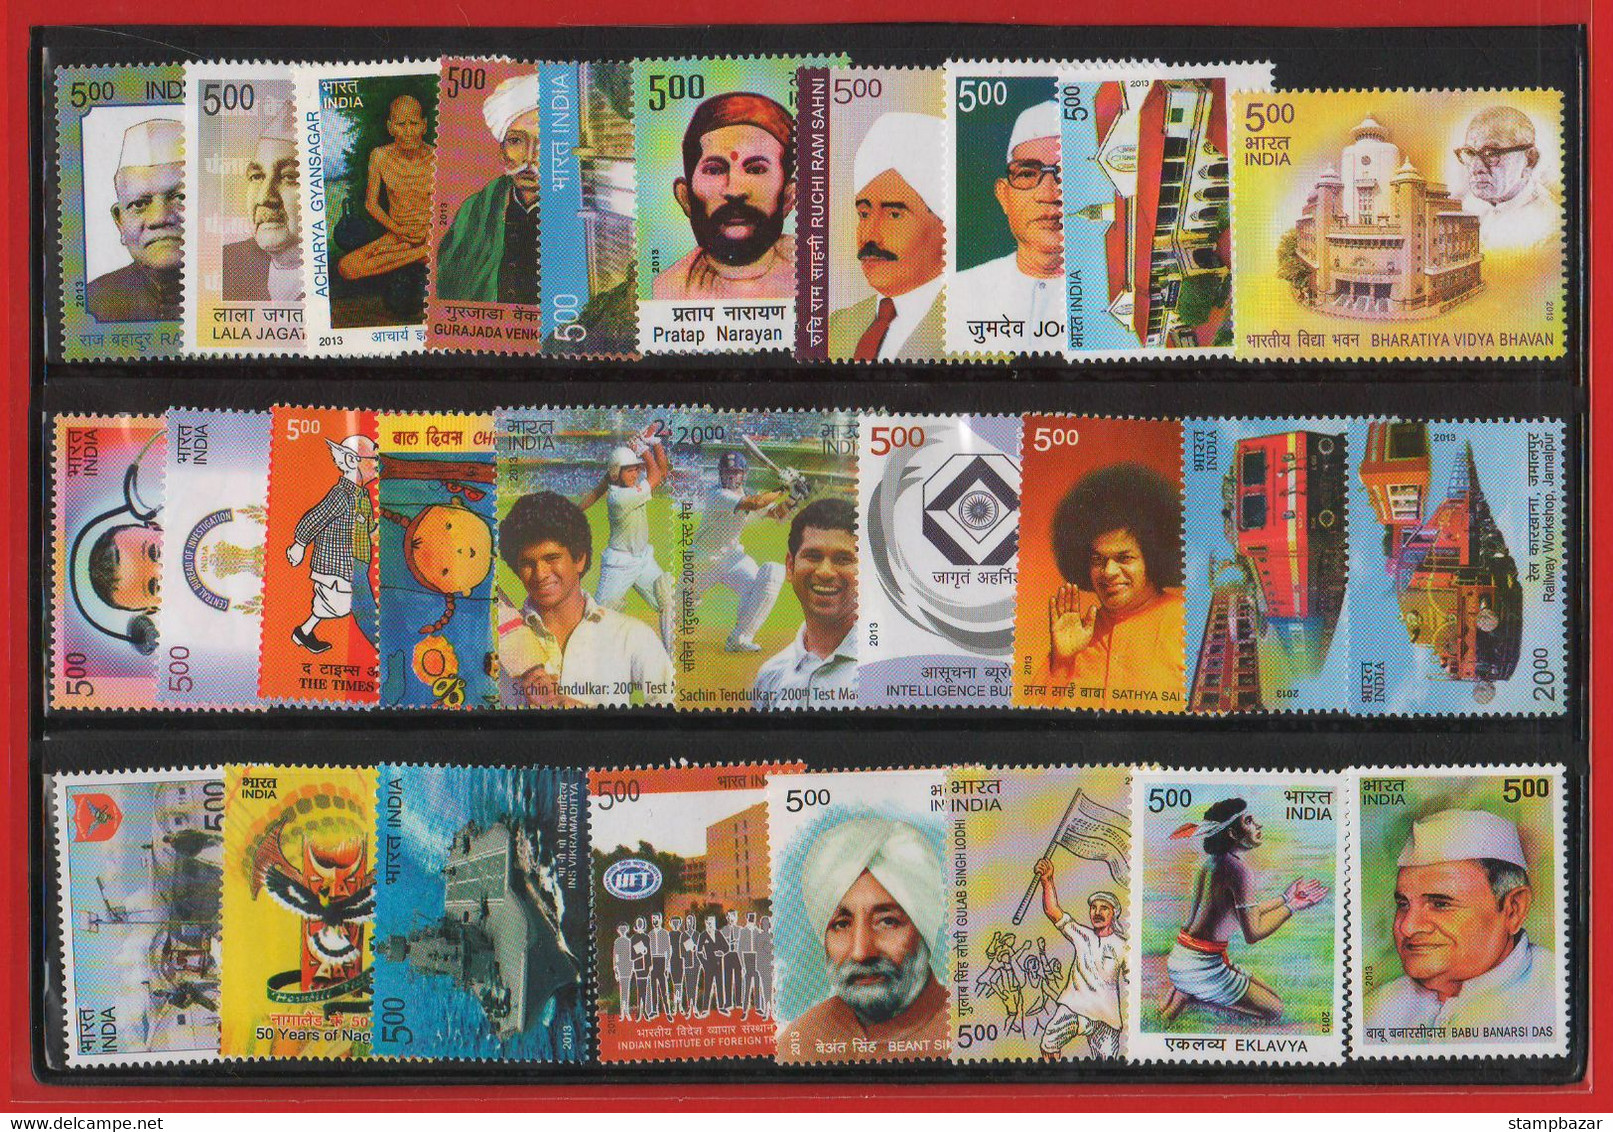 India 2013 Year Pack Full Complete Set Of 122 Stamps Assorted Themes MNH - Volledig Jaar